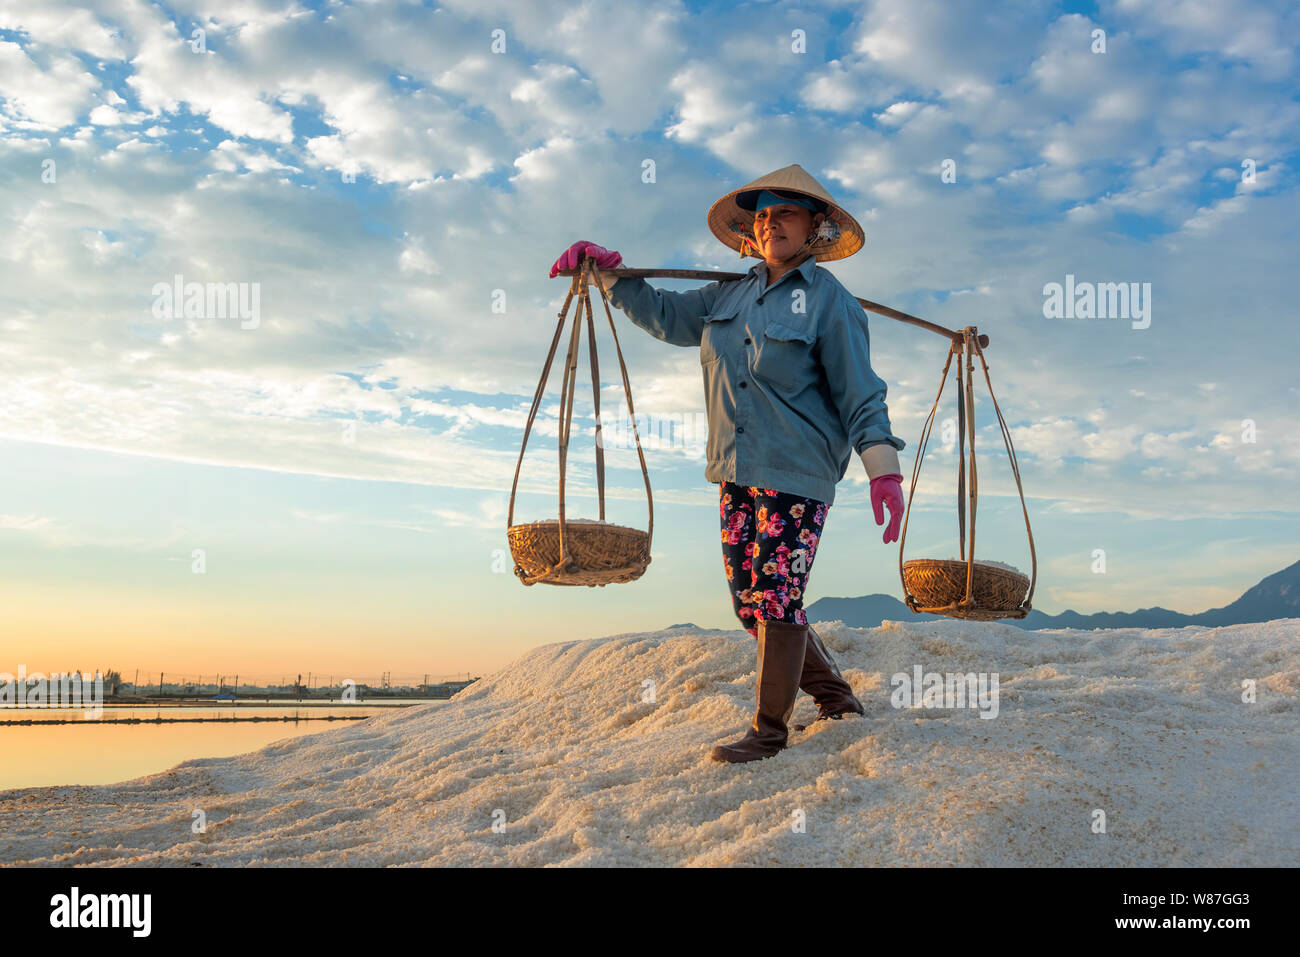 woman working hard by carrying heavy salt baskets on their shoulders early morning in Hon Khoi salt field, Nha Trang Province, Vietnam Stock Photo